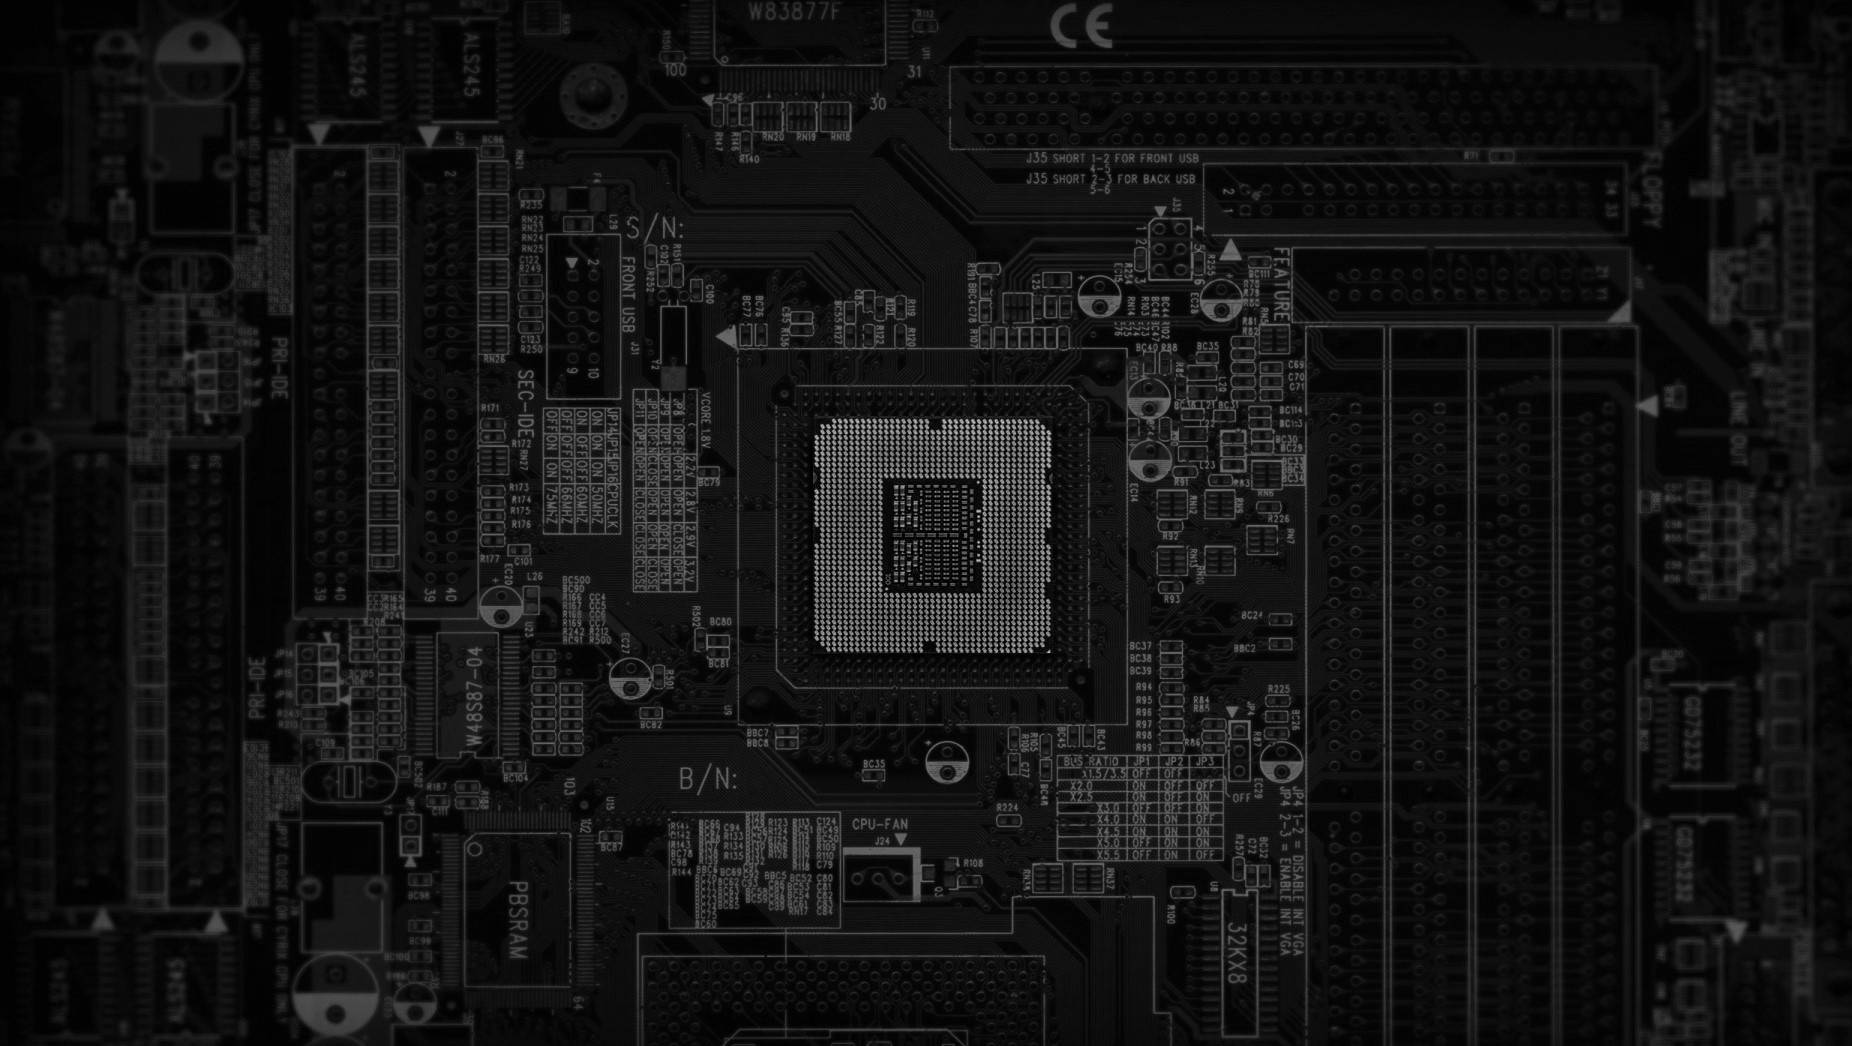 Top 999+ Motherboard Wallpaper Full HD, 4K Free to Use